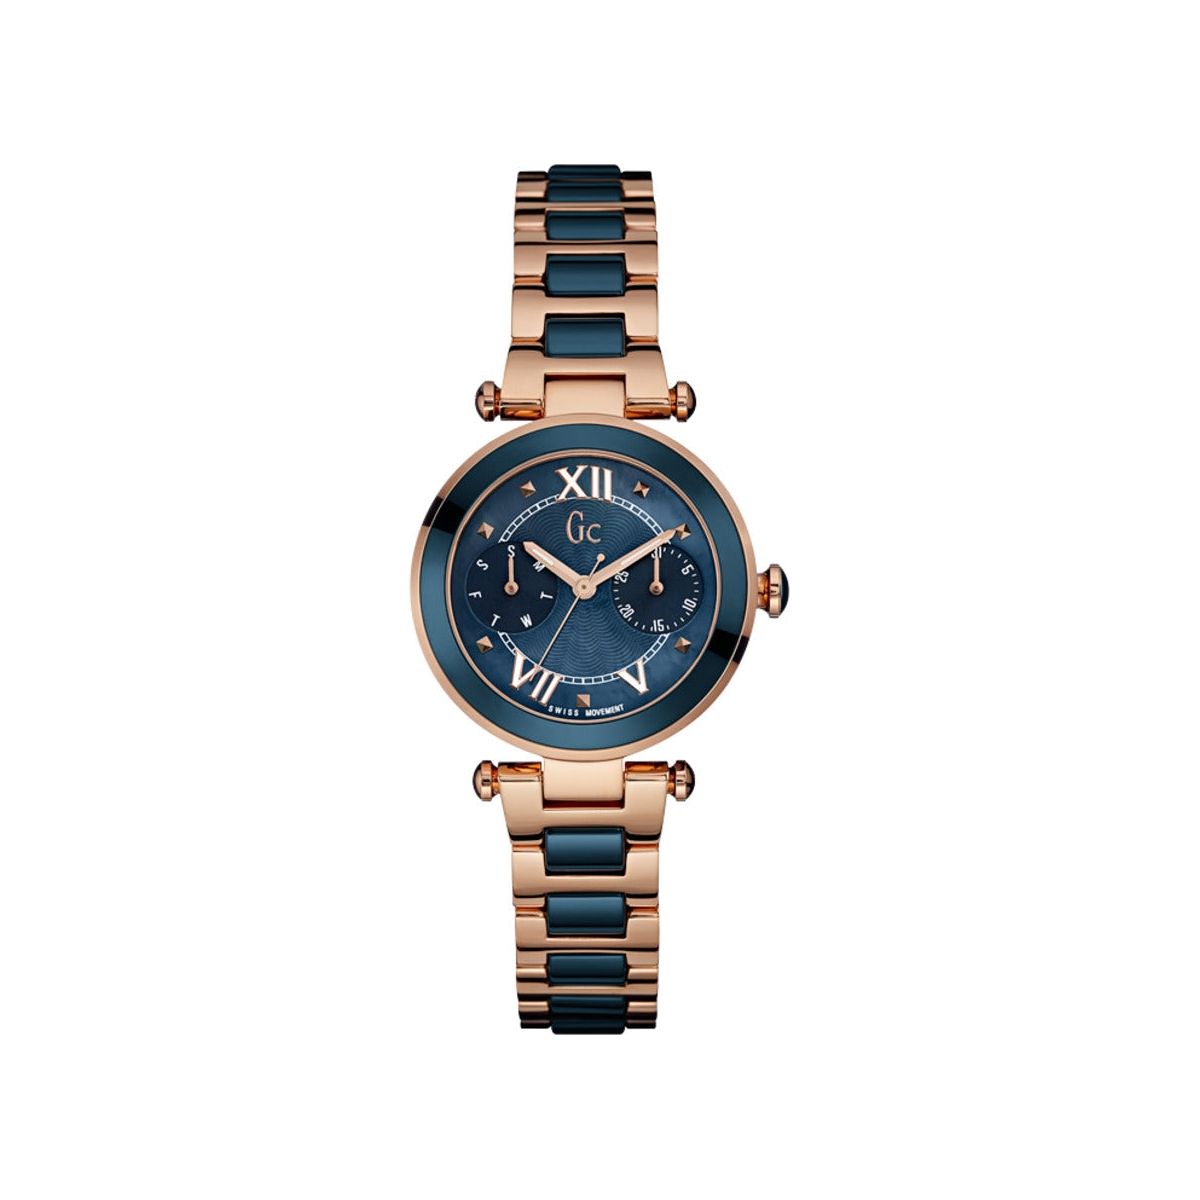 GUESS COLLECTION GUESS COLLECTION WATCHES Mod. Y06009L7 WATCHES guess-collection-watches-mod-y06009l7